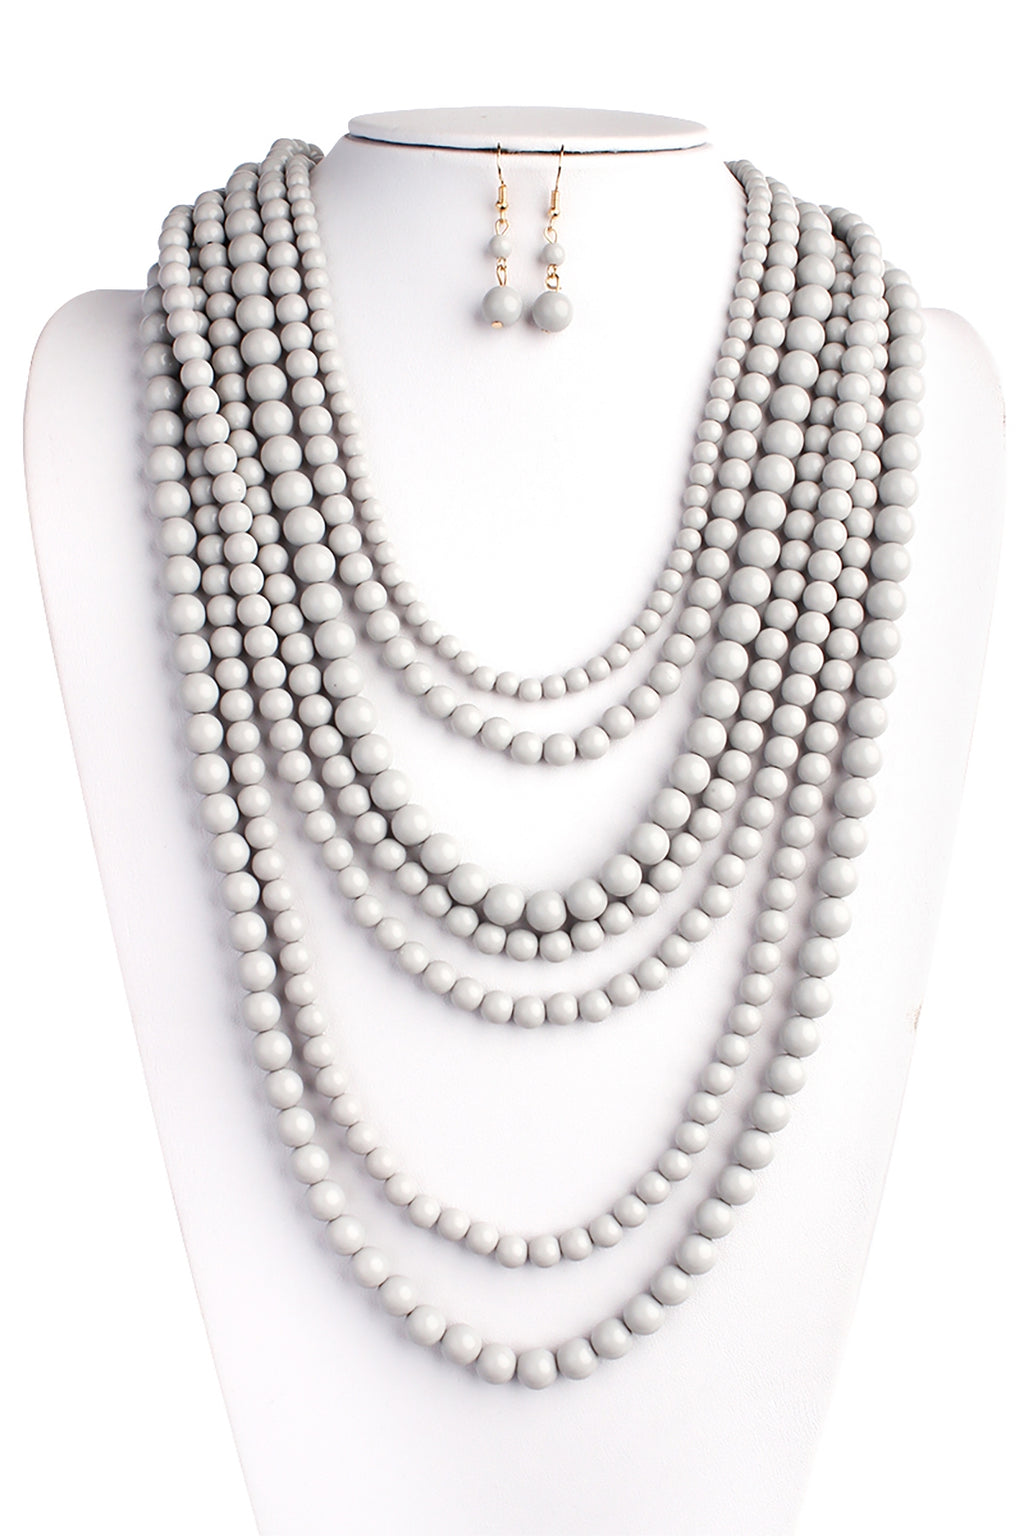 Multilayer Acrylic Light Gray Necklace & Earring Set - Pack of 6